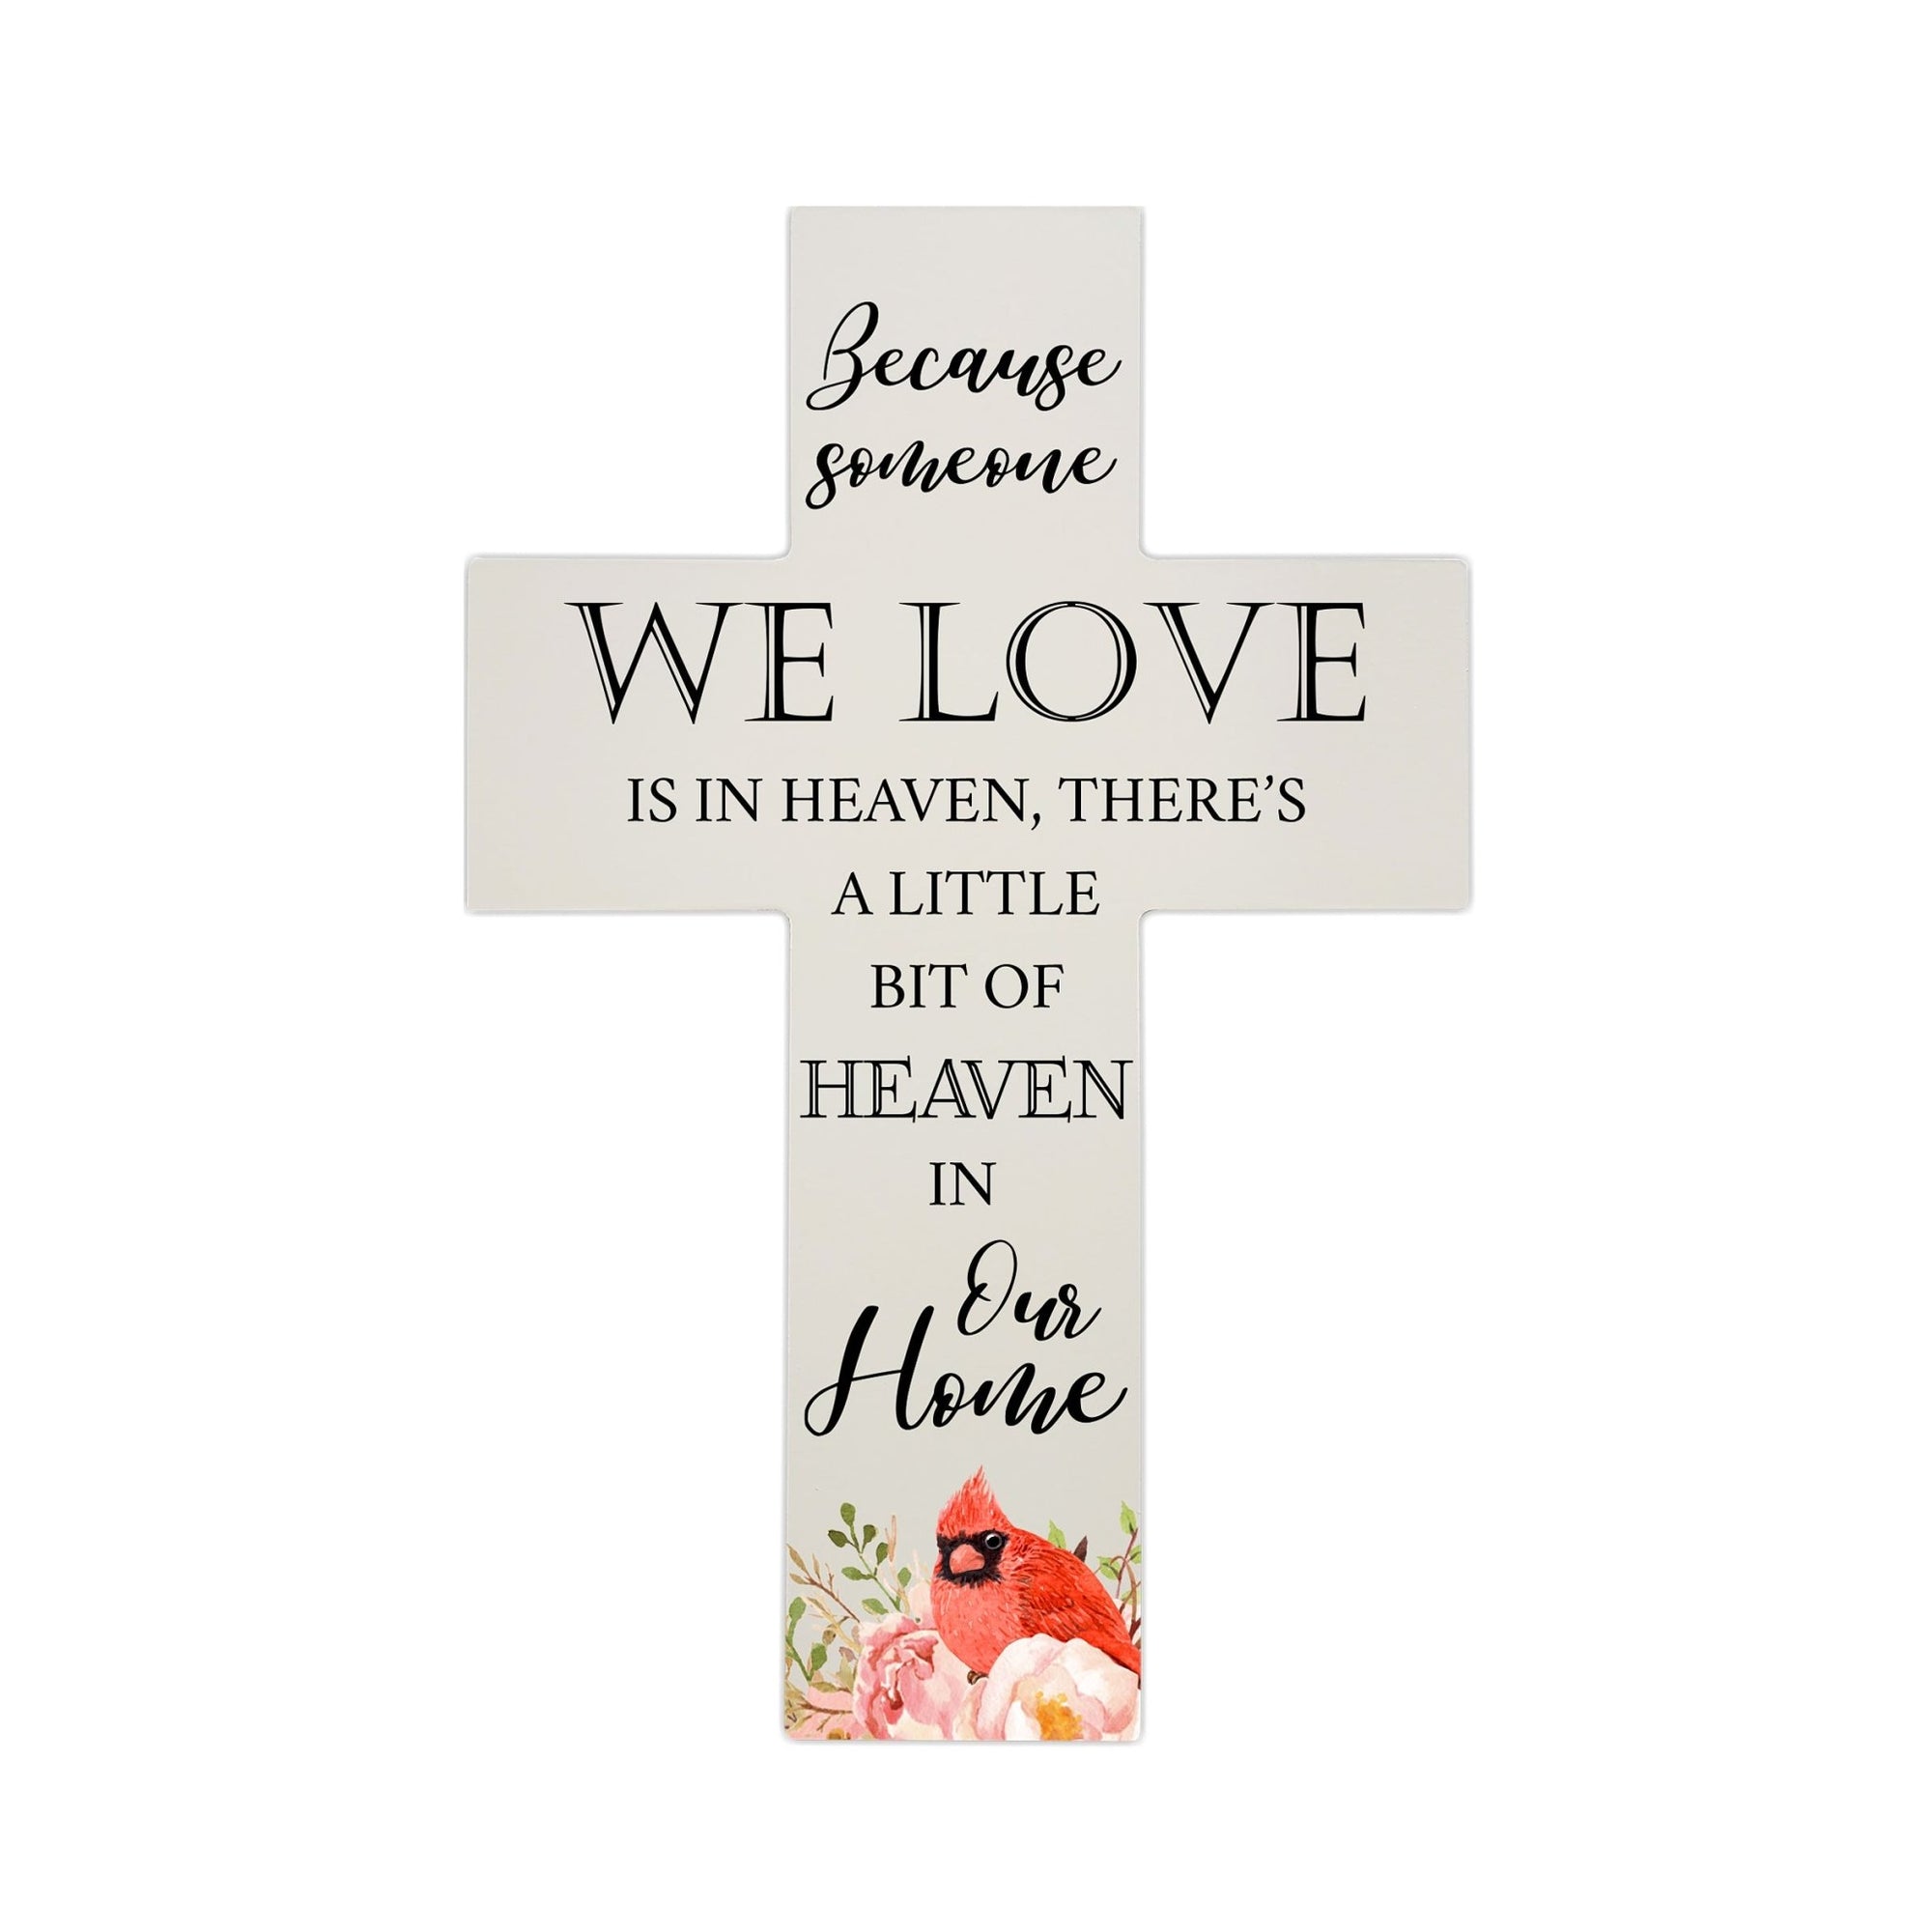 Red Cardinal Memorial Wall Cross For Loss of Loved One Because Someone We Love (Cardinal) Quote Bereavement Keepsake 14 x 9.25 Because Someone We Love Is In Heaven, There's A Little Bit Of Heaven In Our Home - LifeSong Milestones